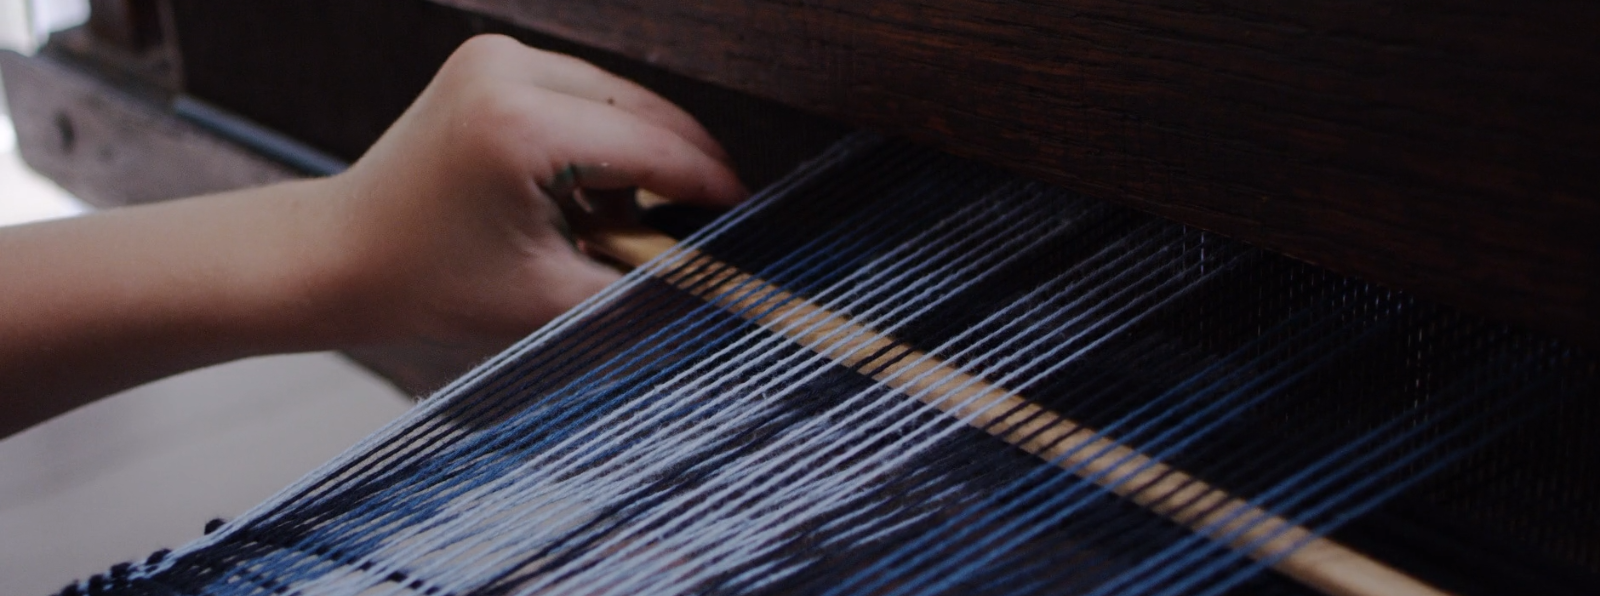 Close up of a child's hand weaving on a loom.